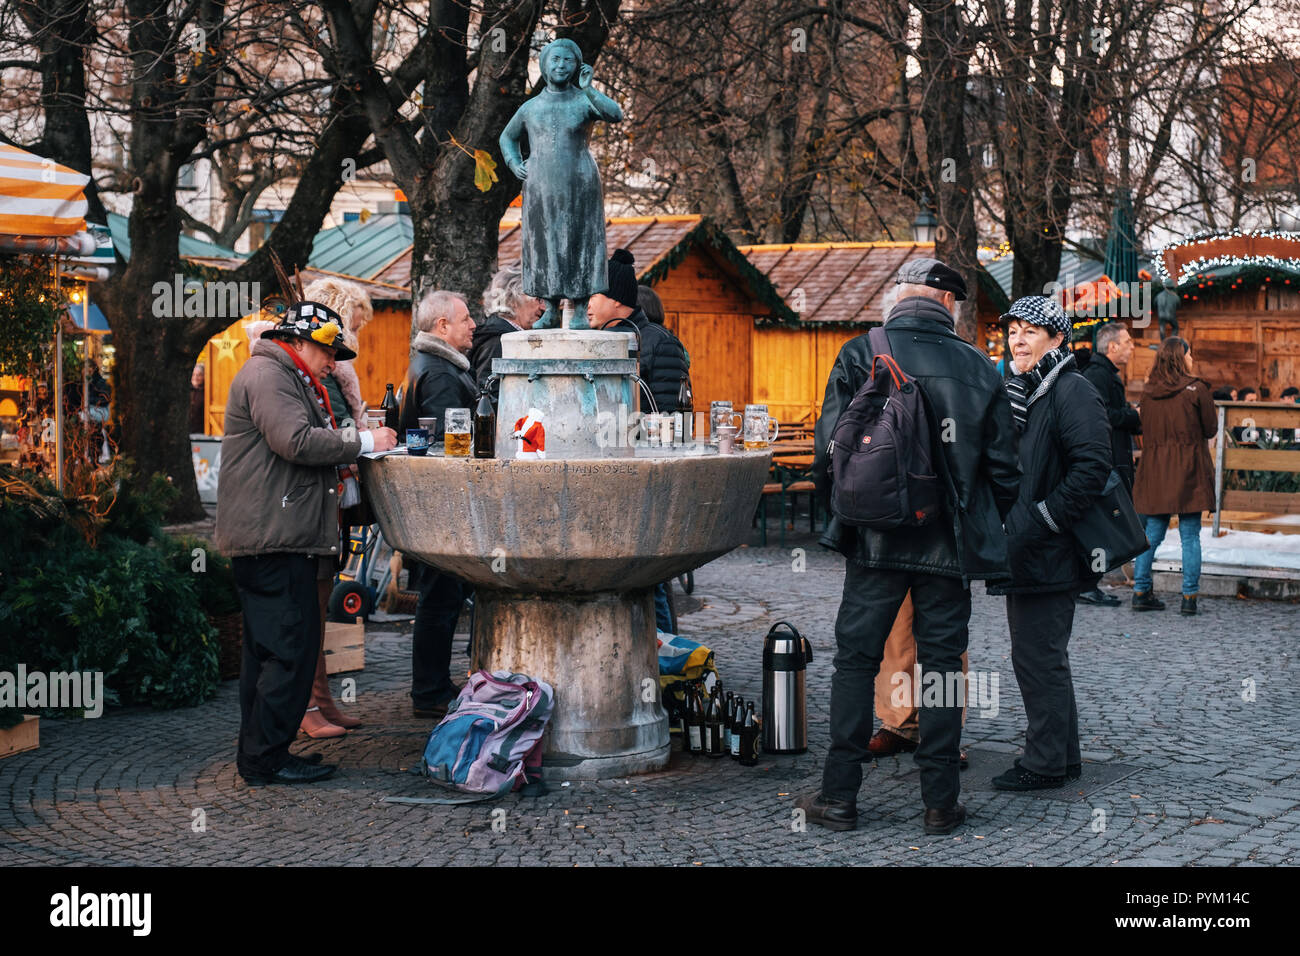 Munich, Germany - December 7, 2017: Local people enjoying beer drinks and food at Victuals Market Viktualienmarkt close to Statue Liesl Karlstadt in M Stock Photo